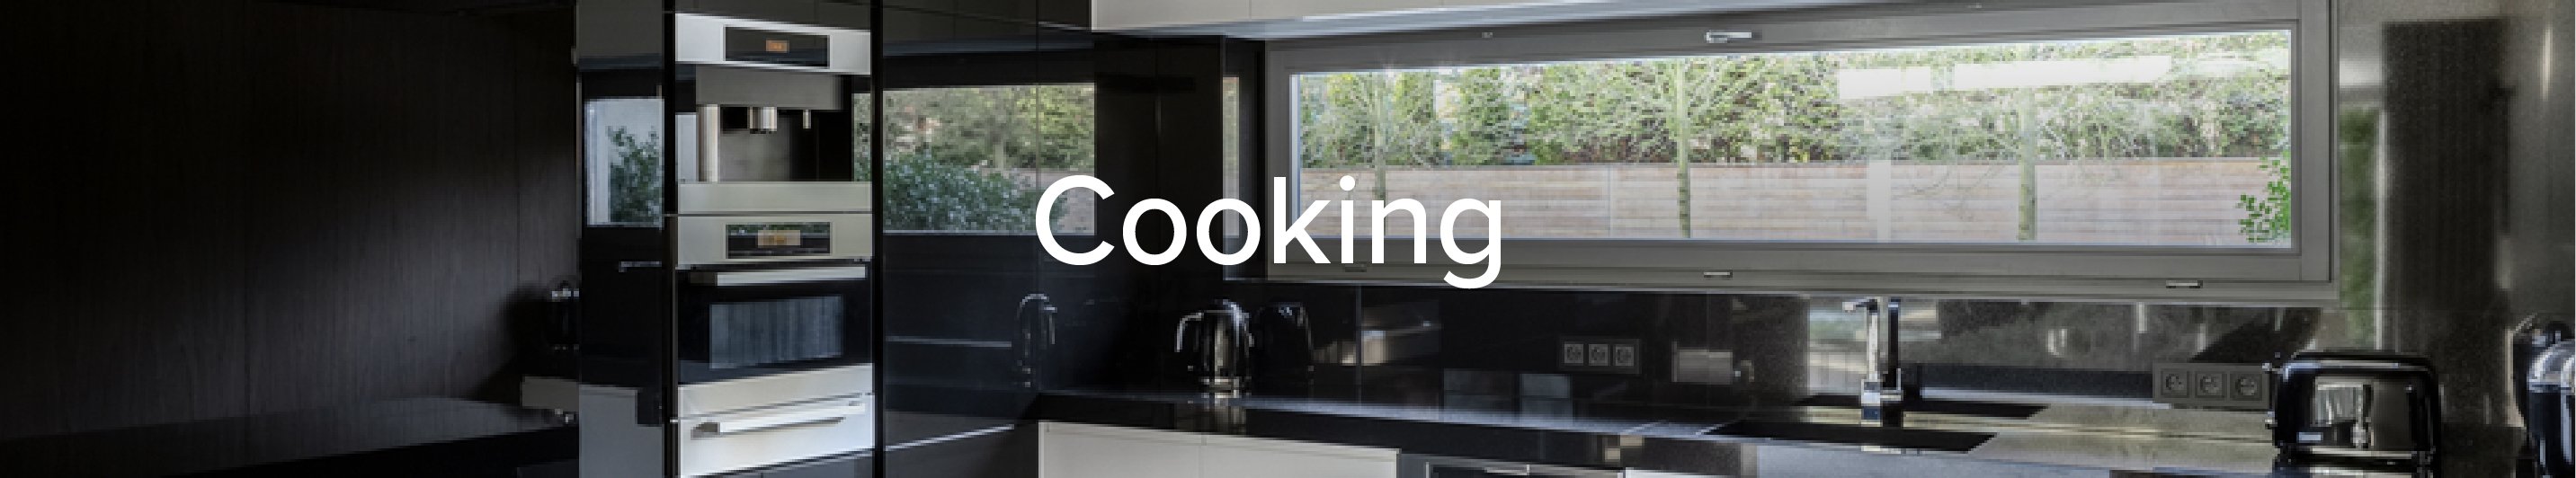 Shop cooking, ovens, hobs, cookers